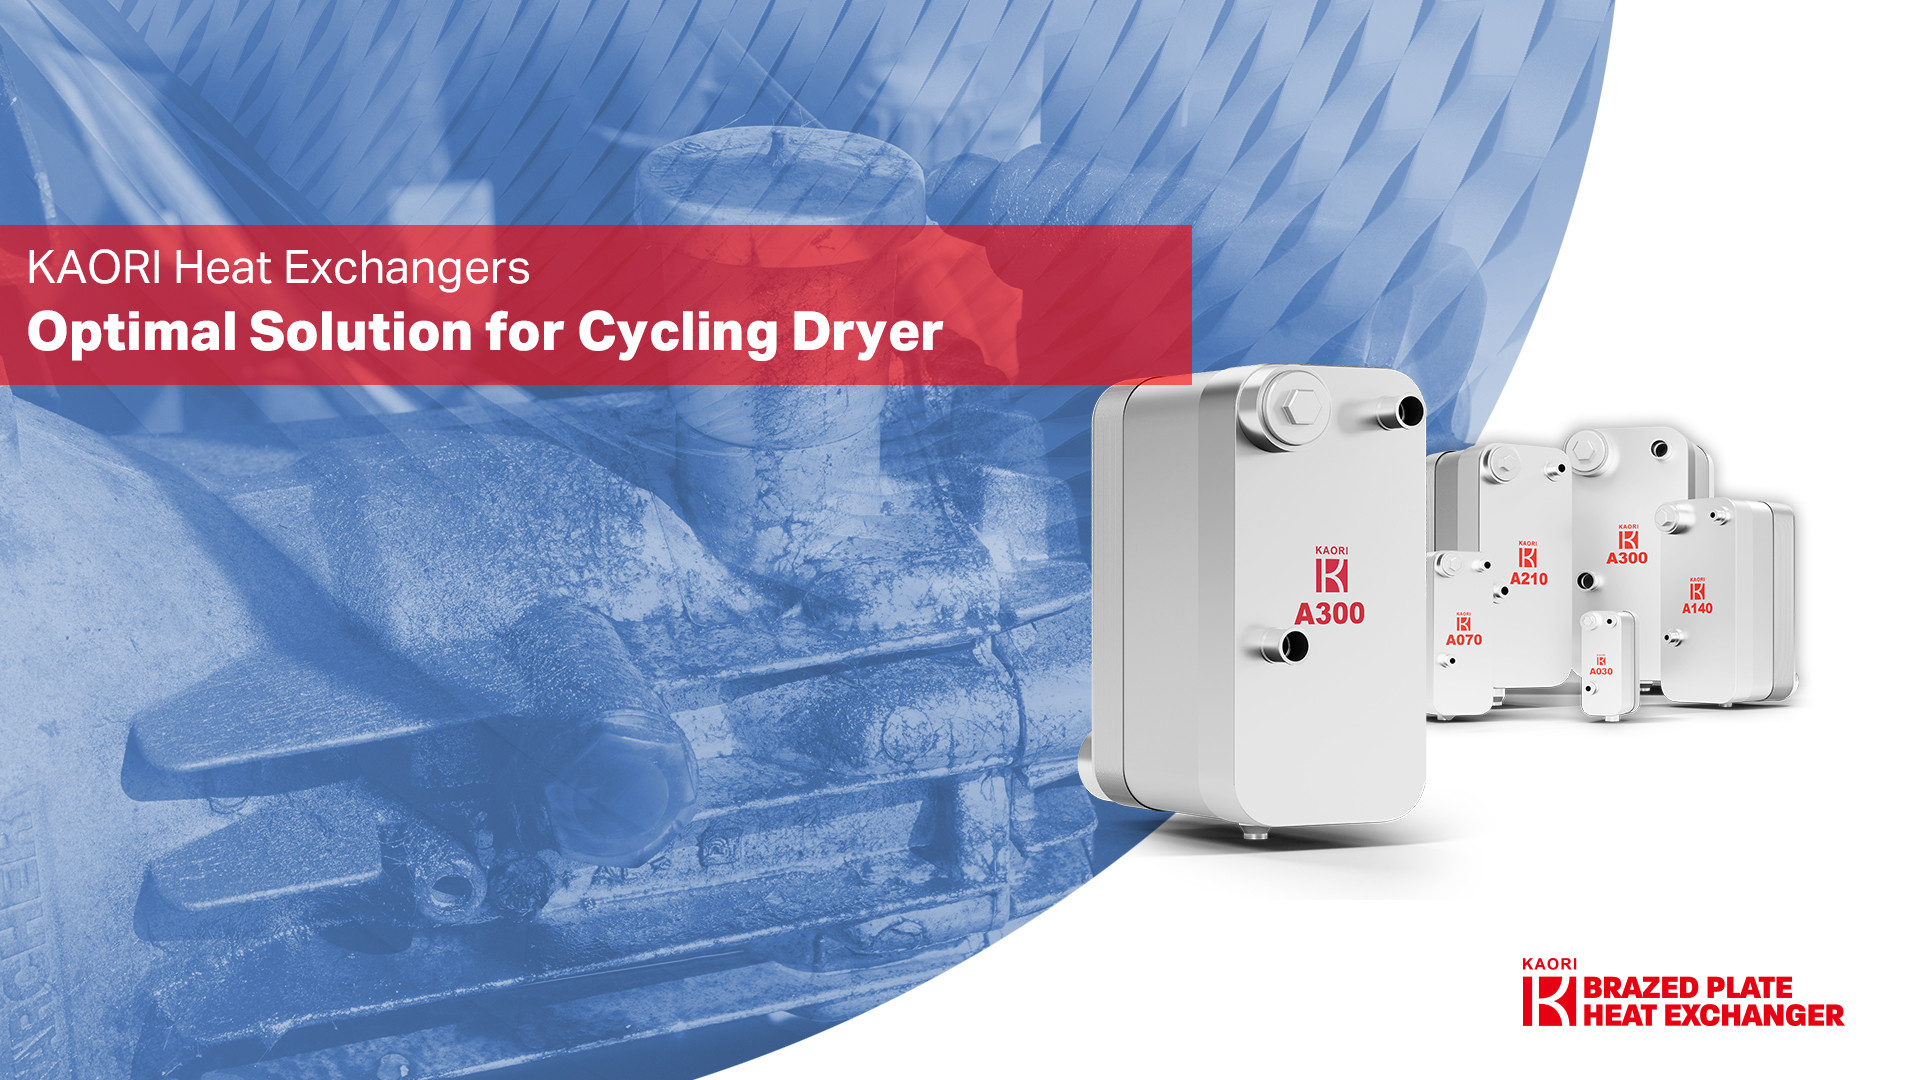  BPHE Solution for Cycling Dryer 